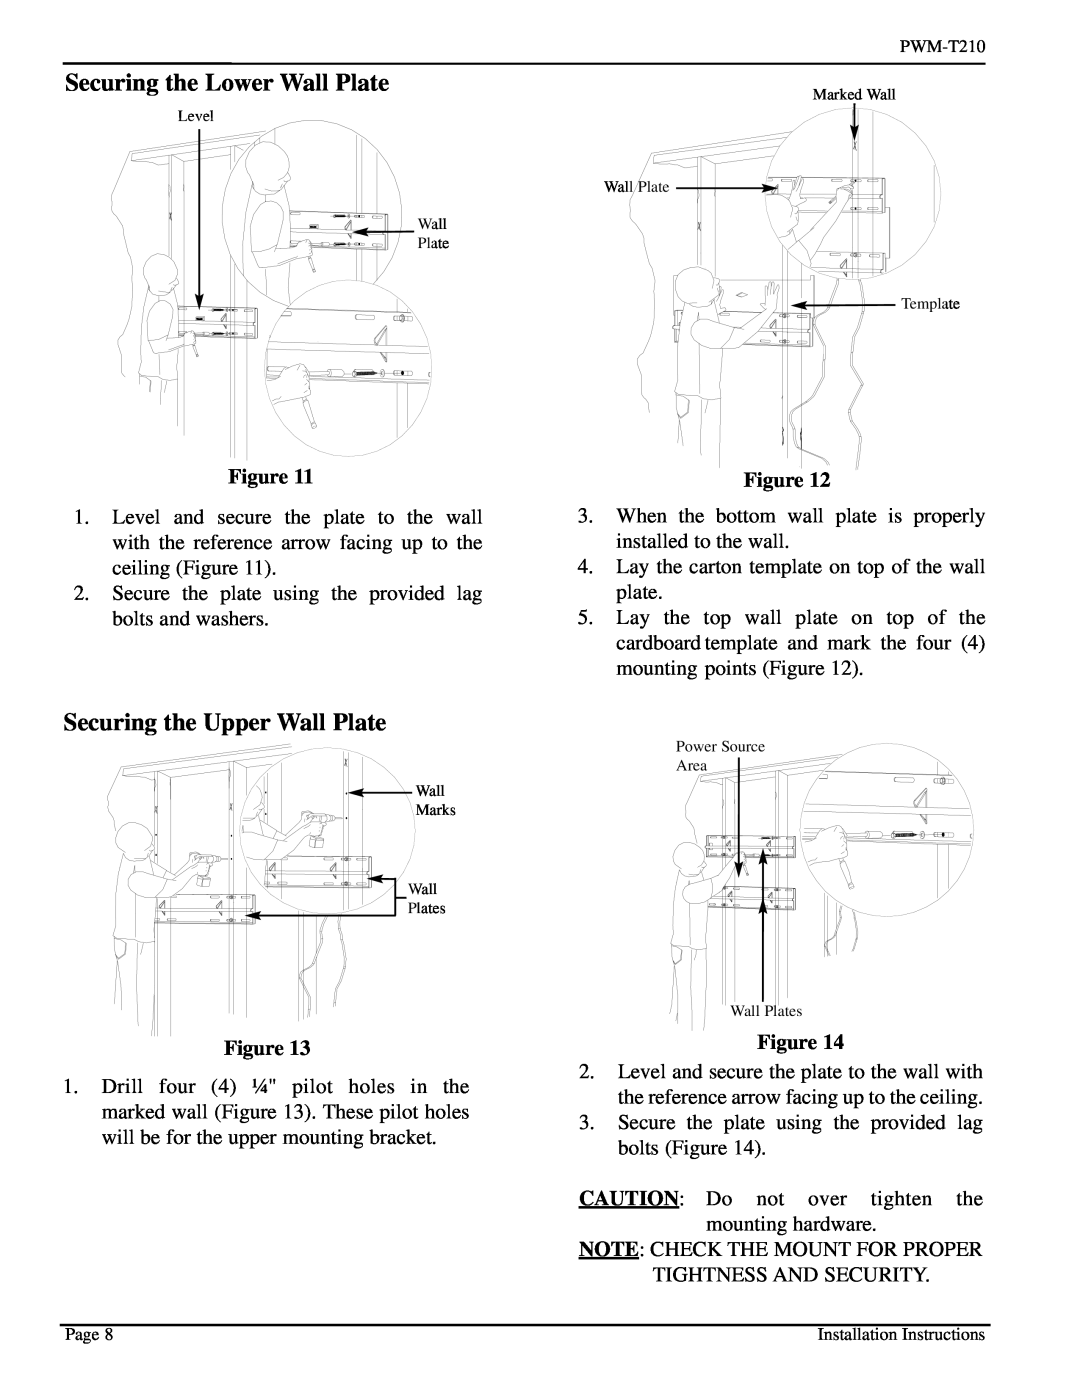 Pioneer PWM-T210 installation instructions Securing the Lower Wall Plate, Securing the Upper Wall Plate 